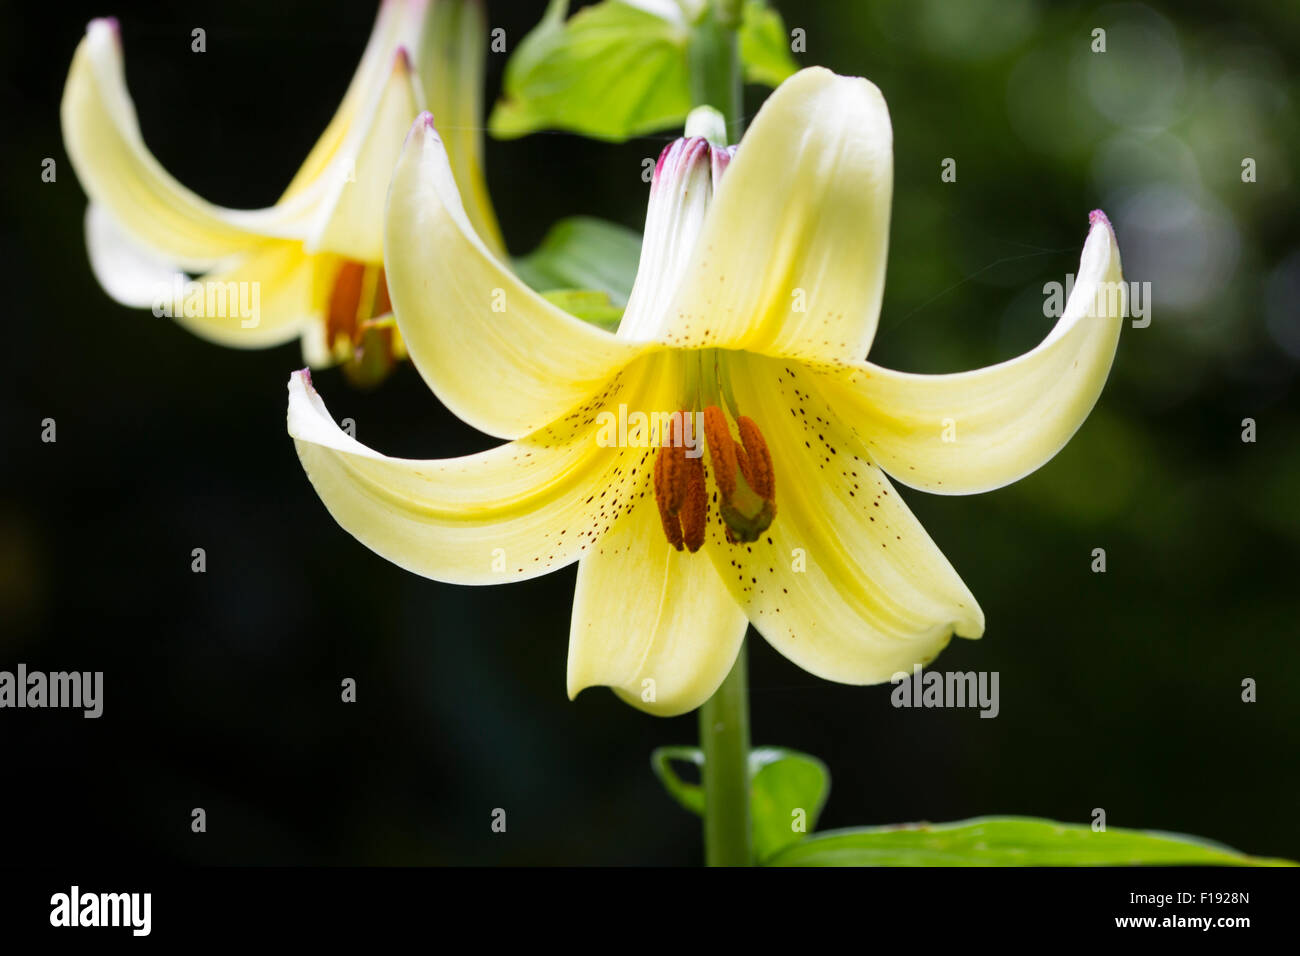 Close up of flower of the early summer flowering Caucasian lily, Lilium monadelphum Stock Photo